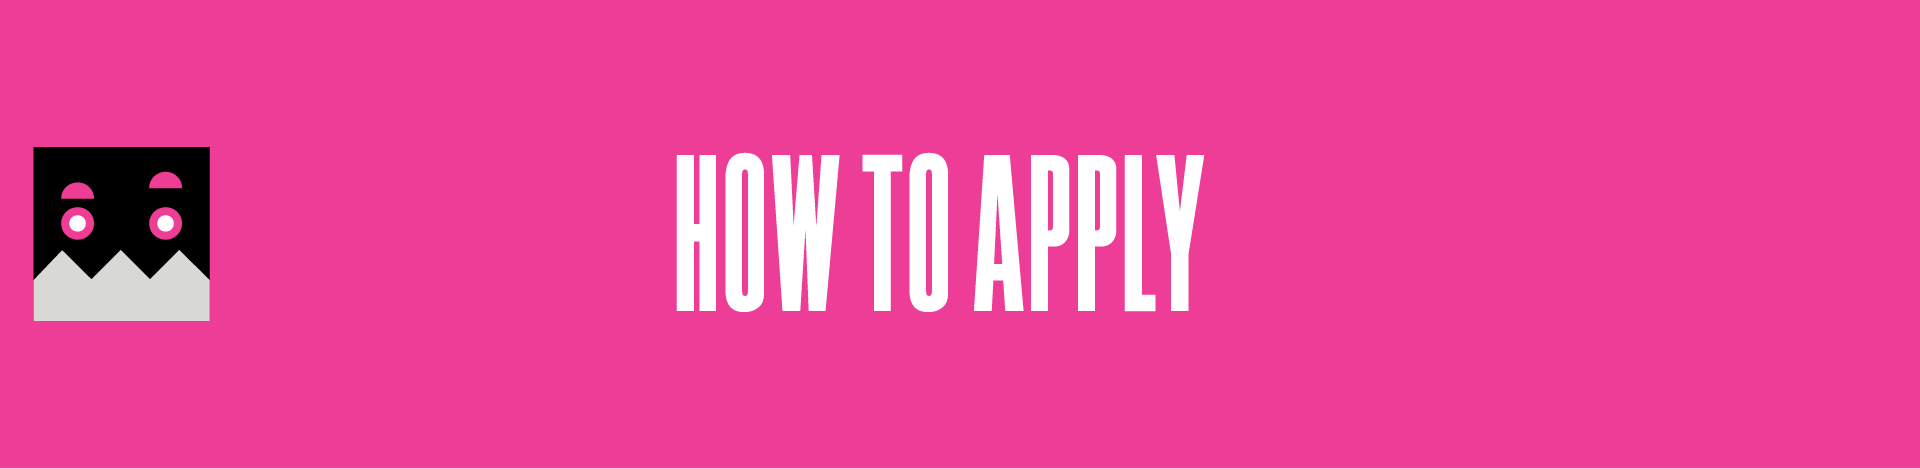 How to apply.png